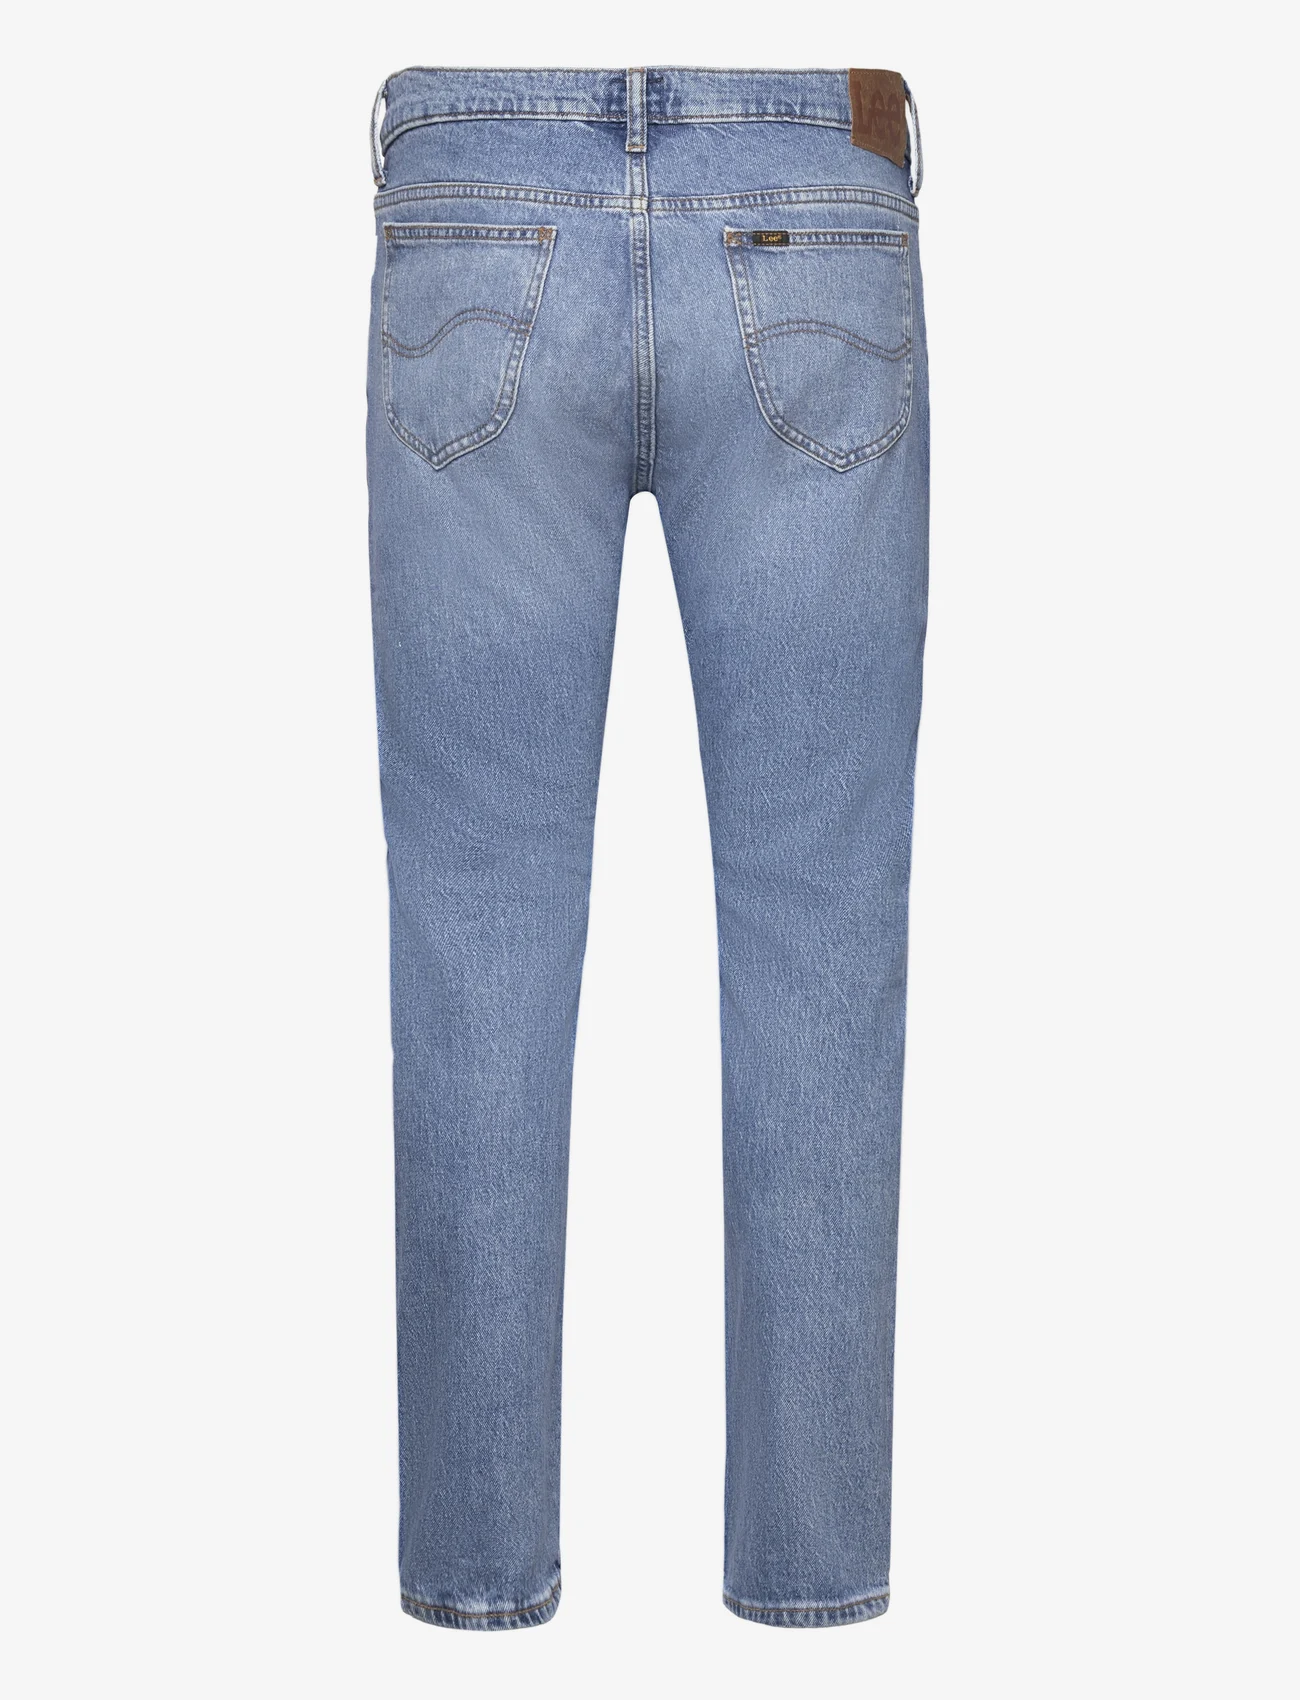 Lee Jeans - RIDER - slim jeans - downtown - 1